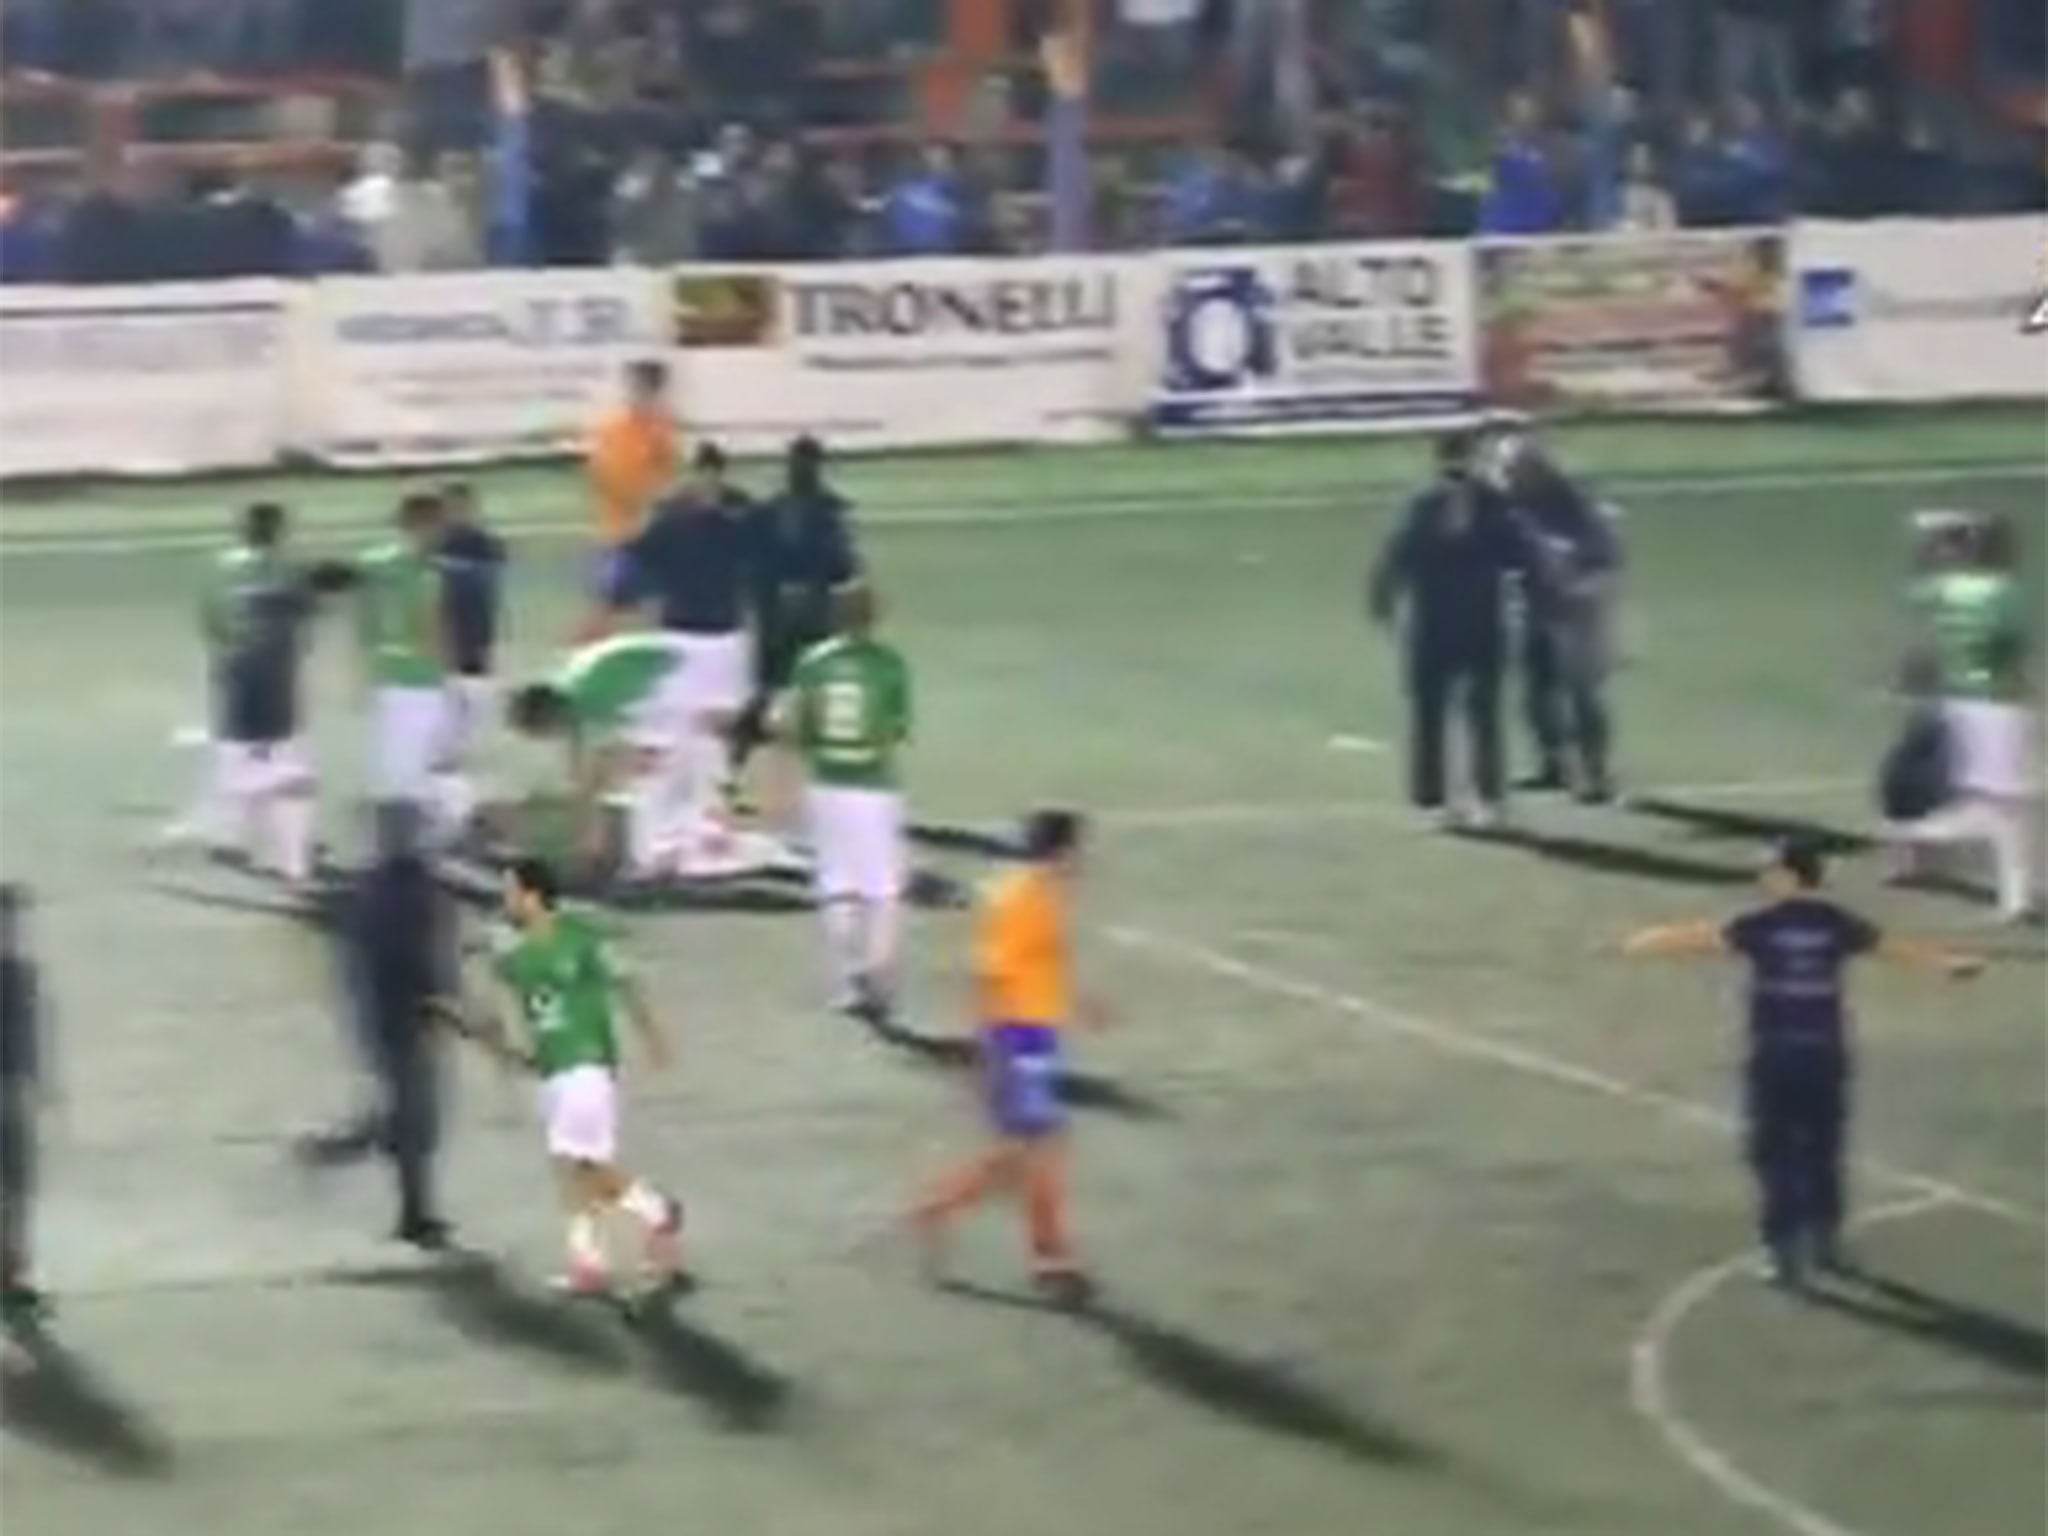 Football match in Argentina turns into a mass brawl